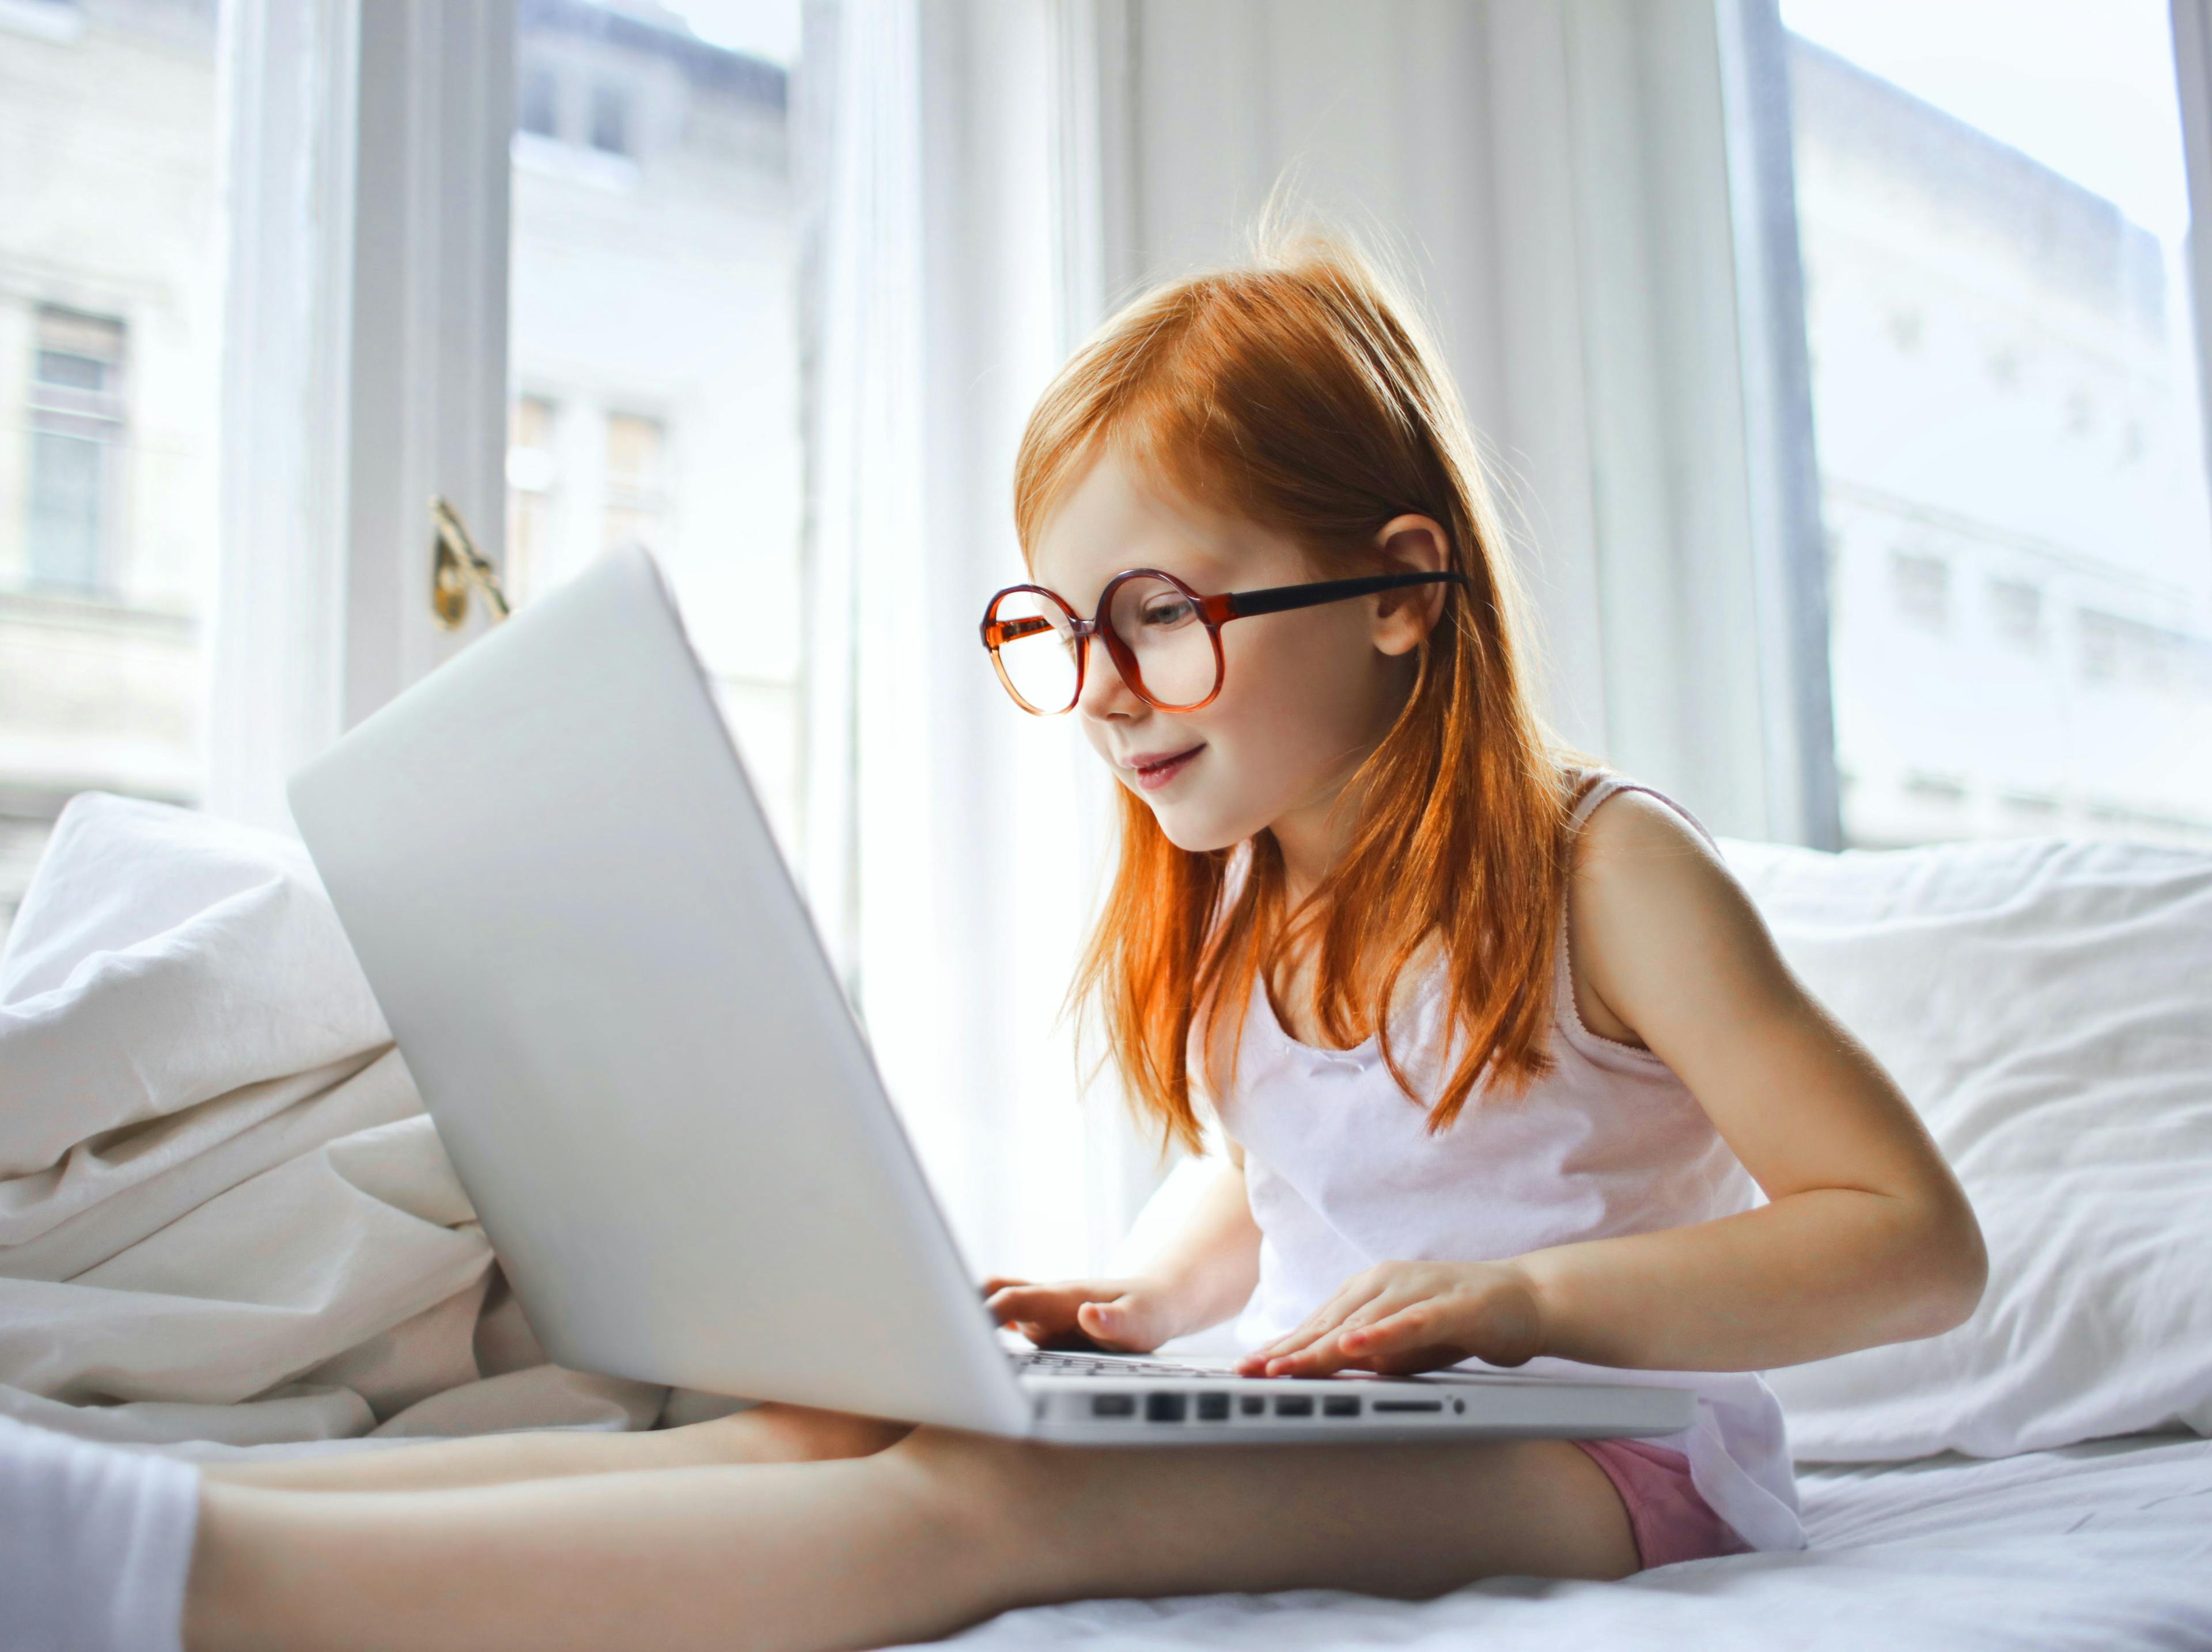 Girl with glasses on computer